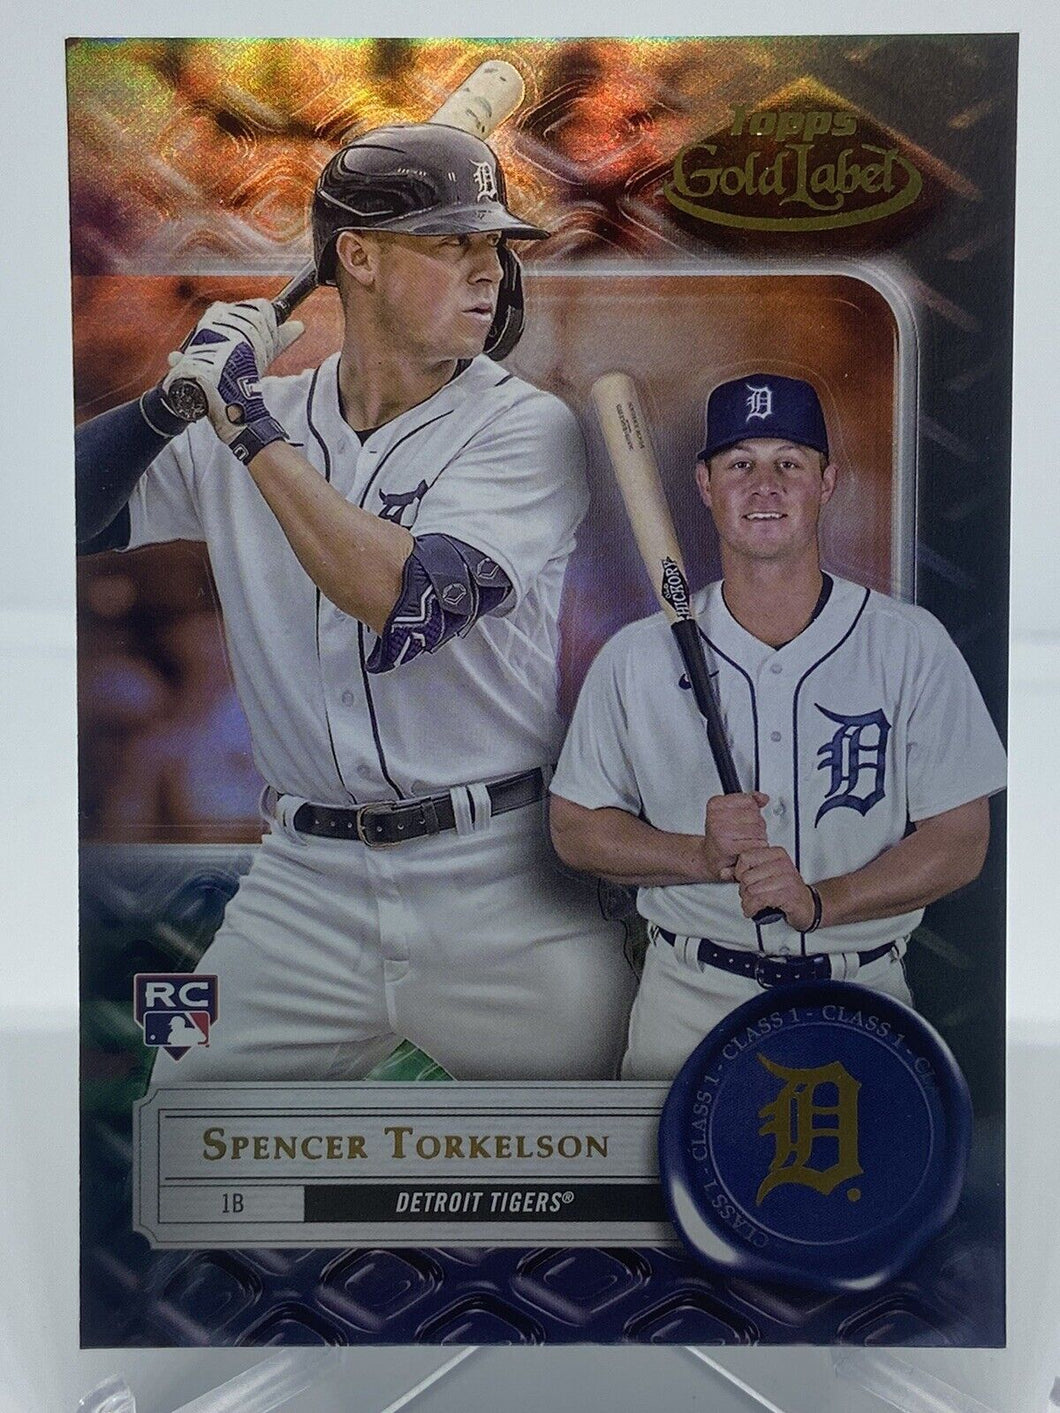 2022 Topps Gold Label #75 Spencer Torkelson Detroit Tigers RC CLASS 1